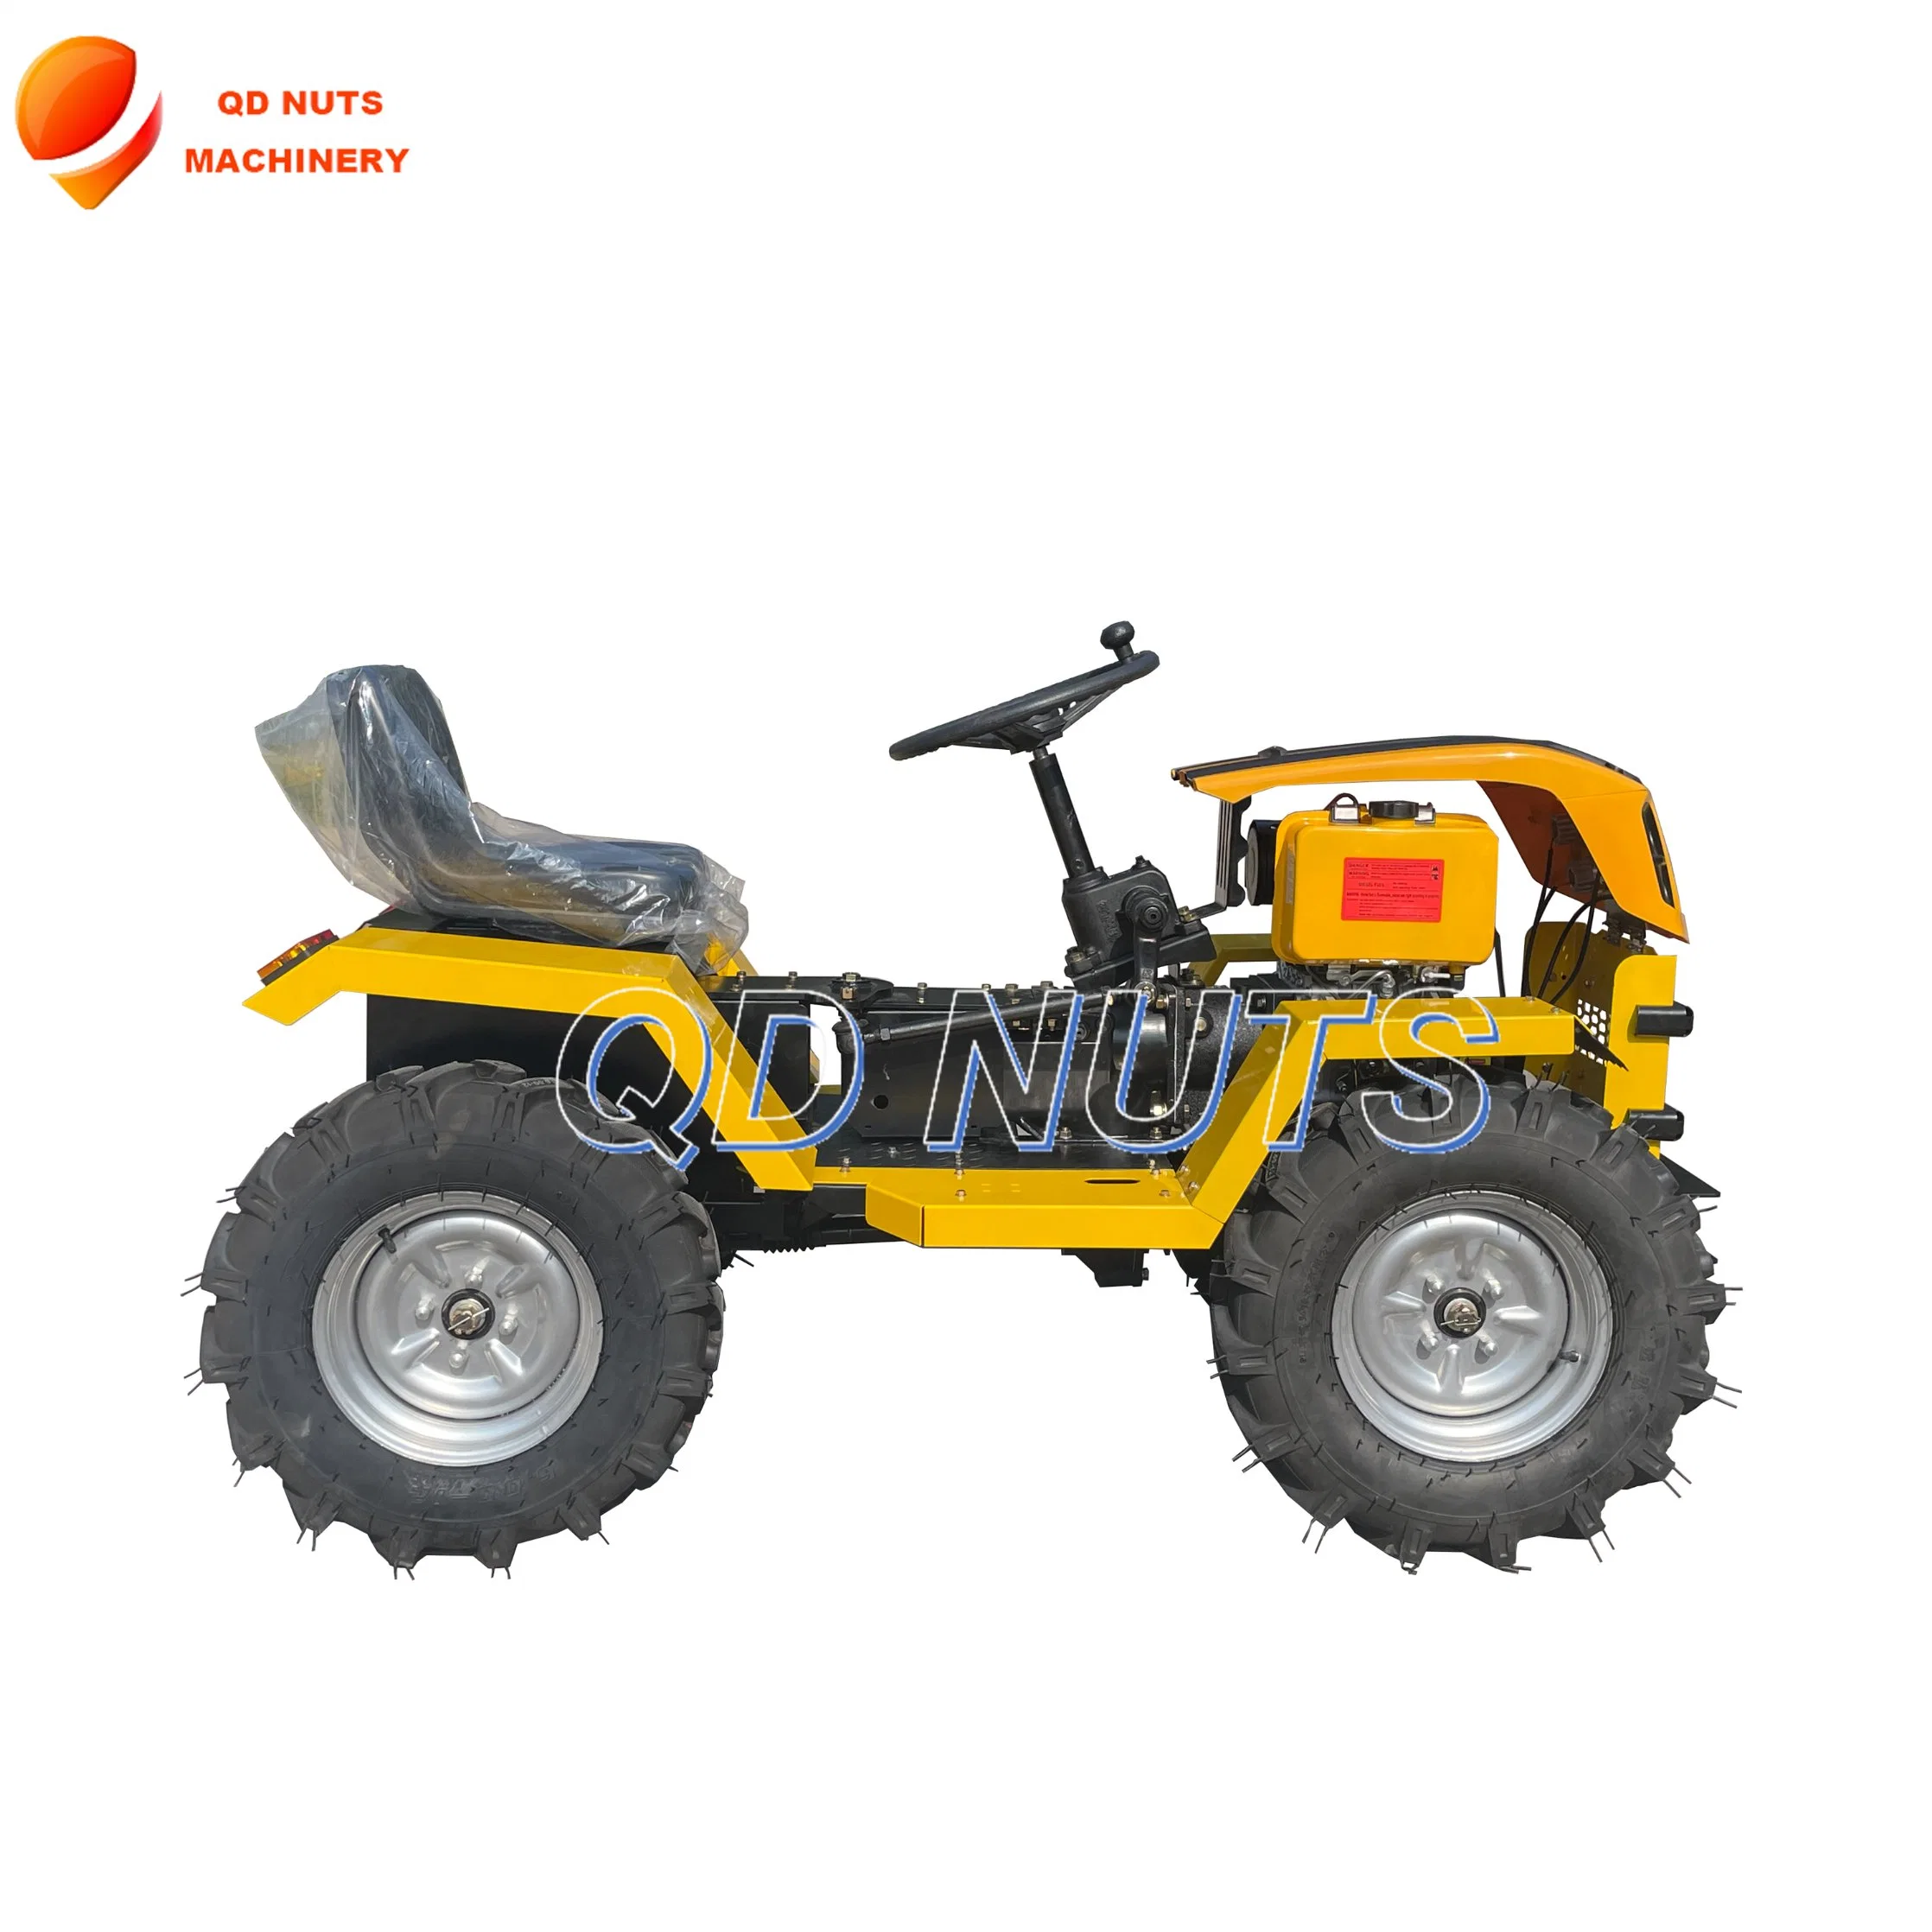 4WD 12-18HP Orchard Tractor Small Four Wheel Farm Tractor Garden Tractor Walking Tractor Mini Tractor for Agricultural Machinery Machine CE